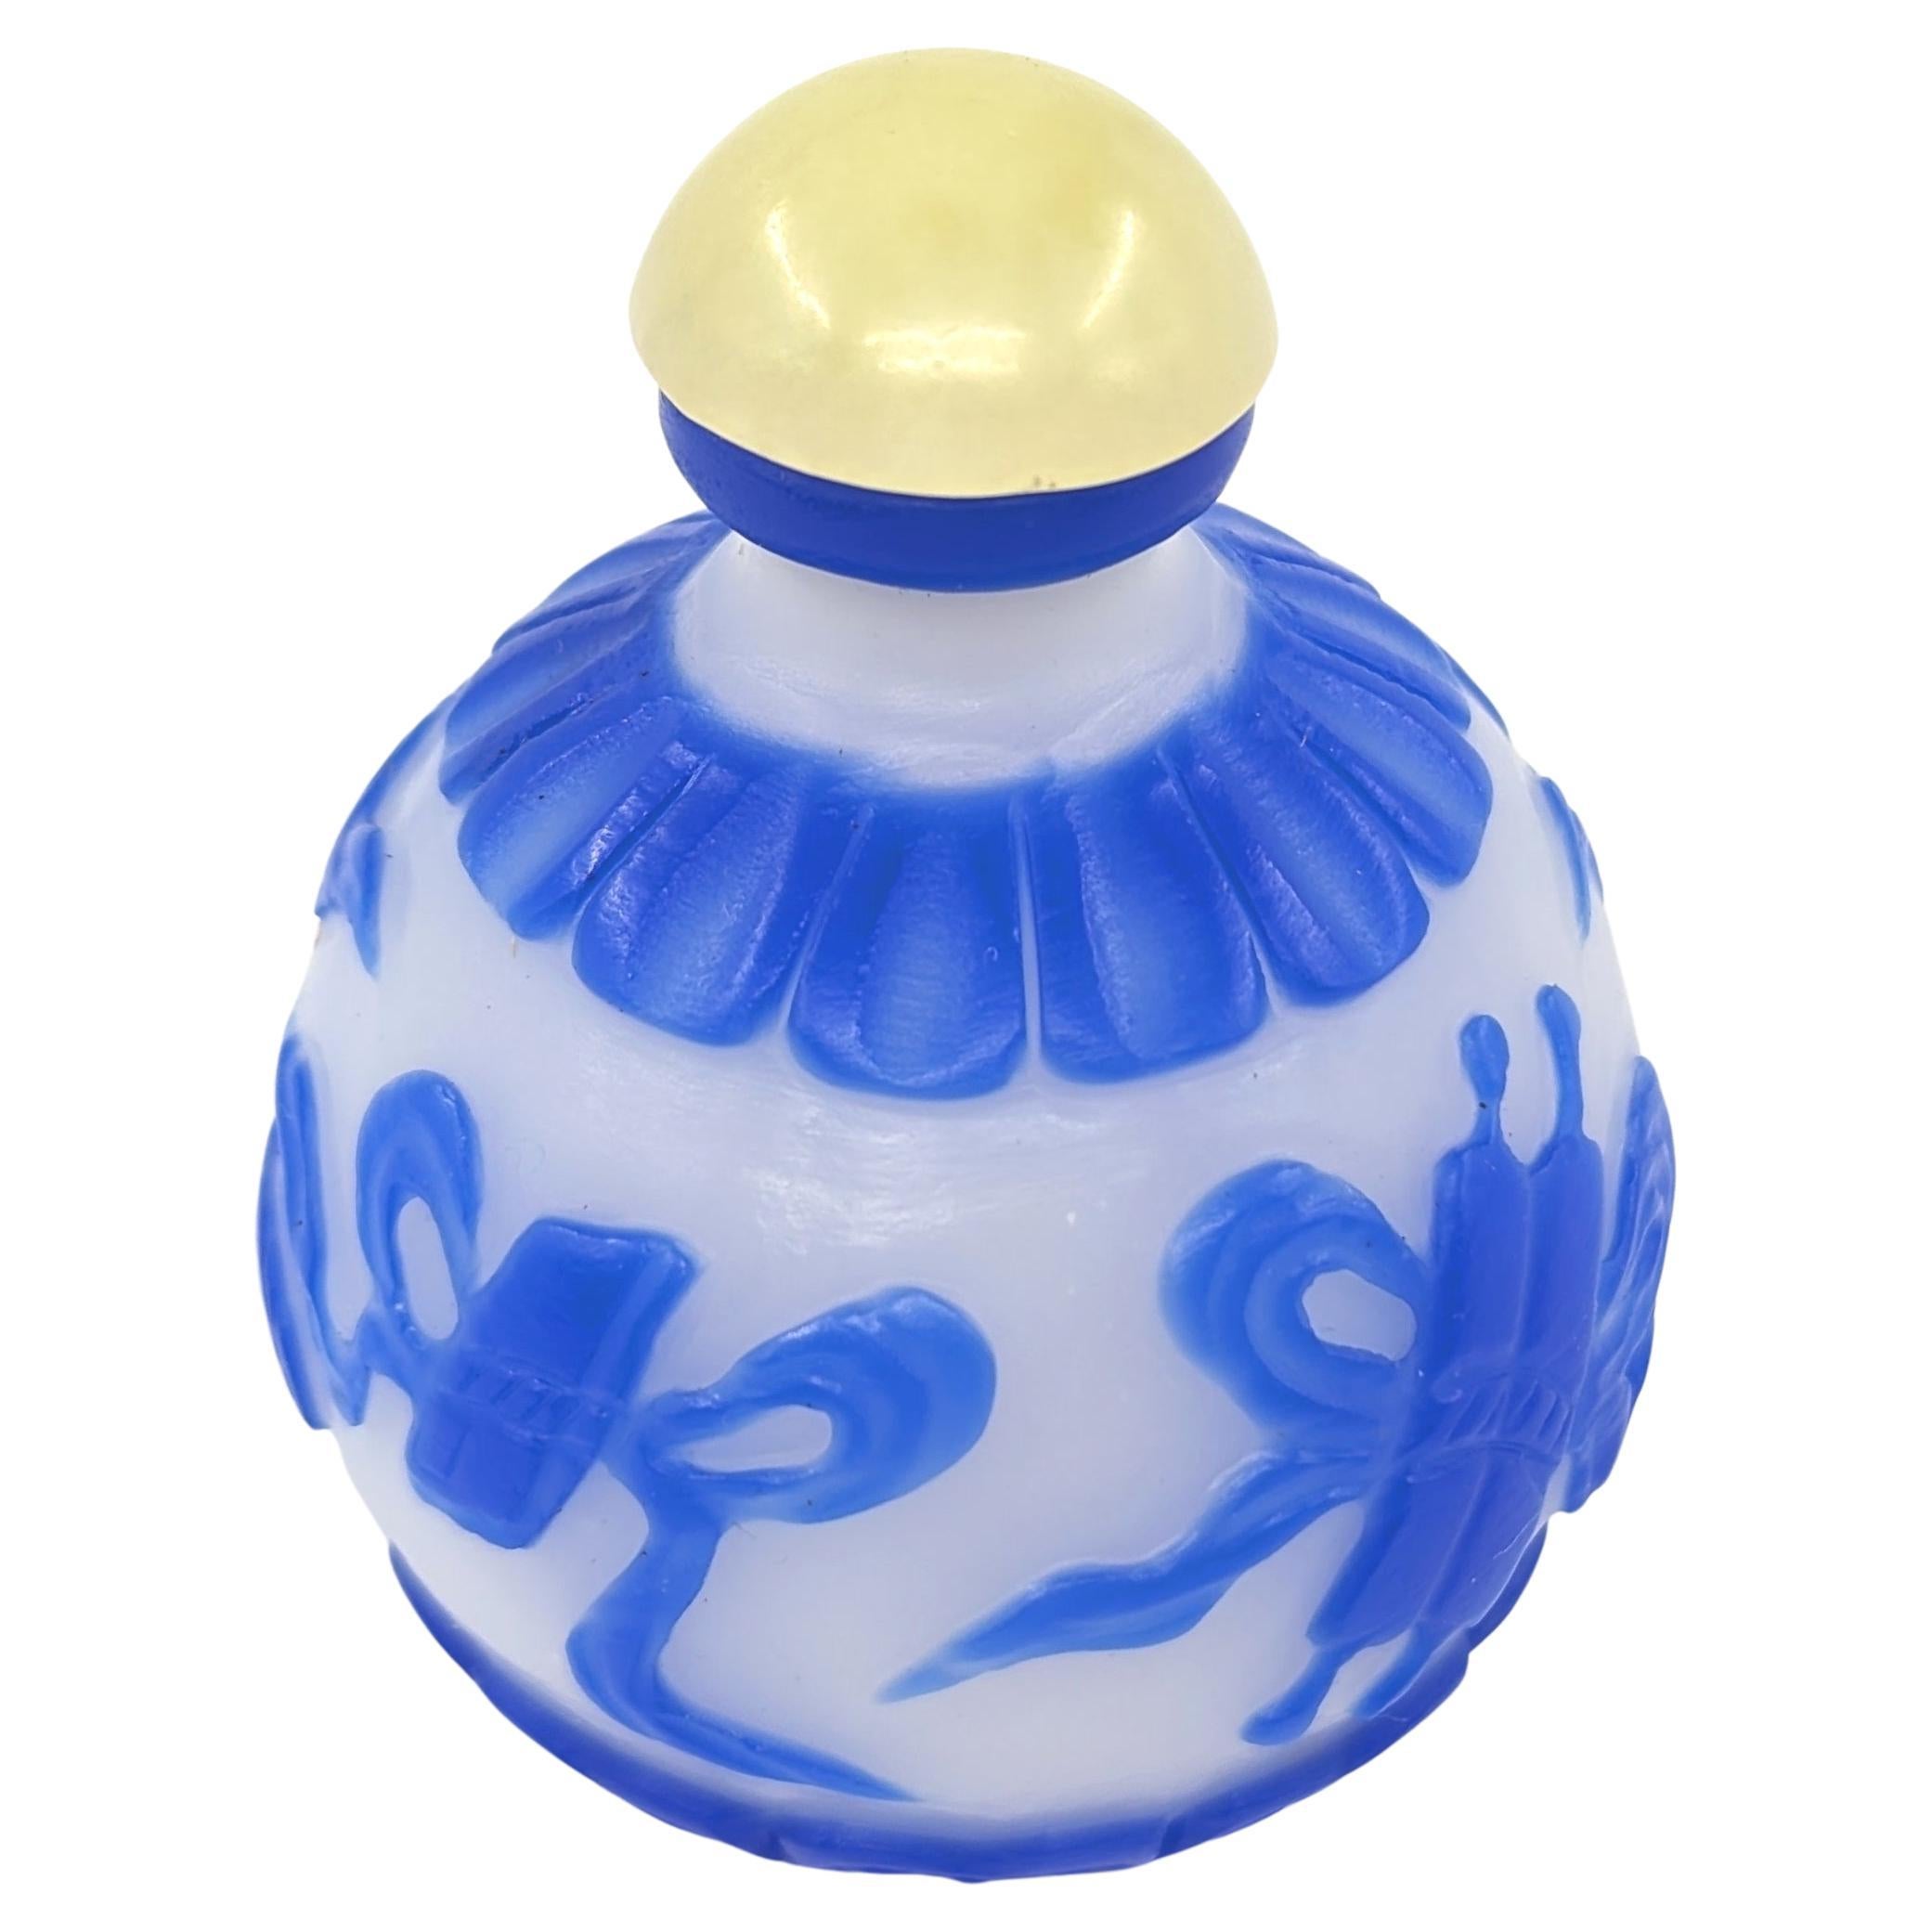 20th Century Chinese Blue Glass Overlay Globular Snuff Bottle Carved Buddhist Treasures 20c For Sale